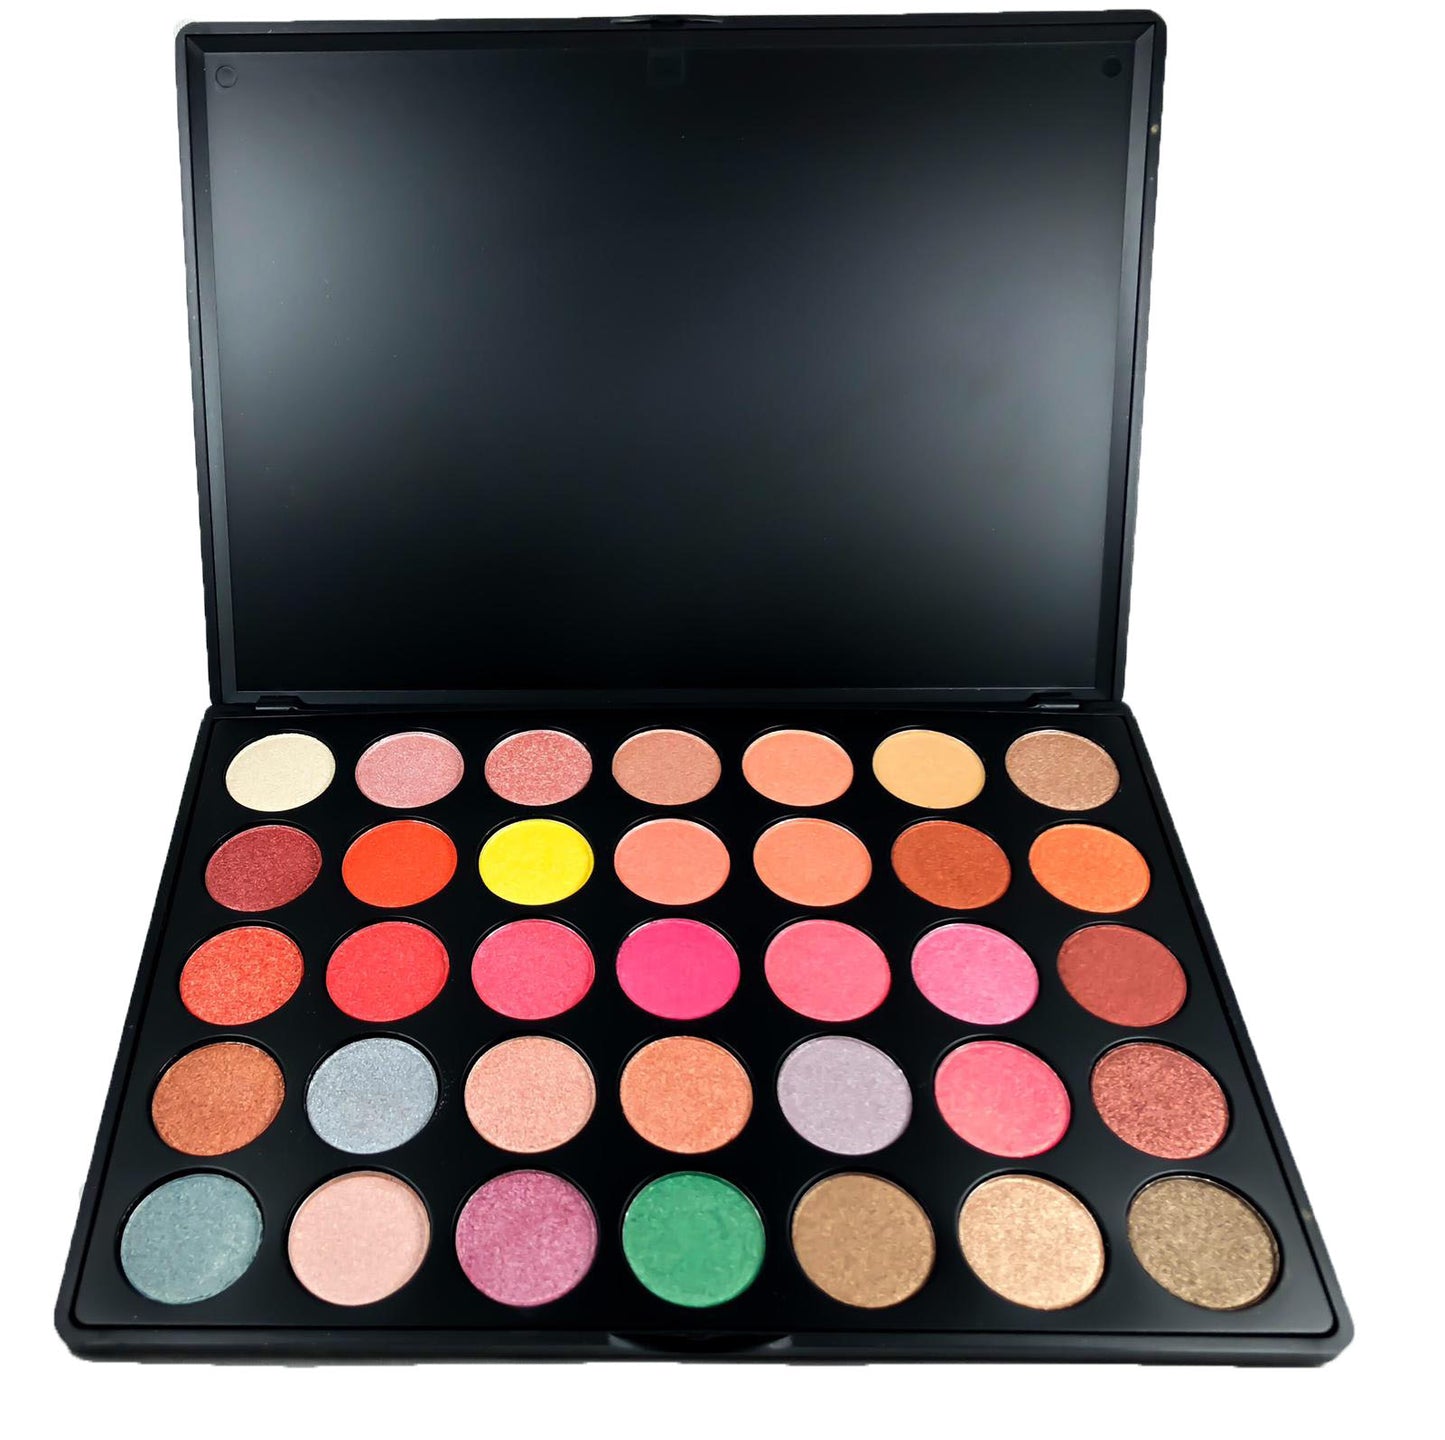 Allure By Nature High Pigment Eyeshadow Palette